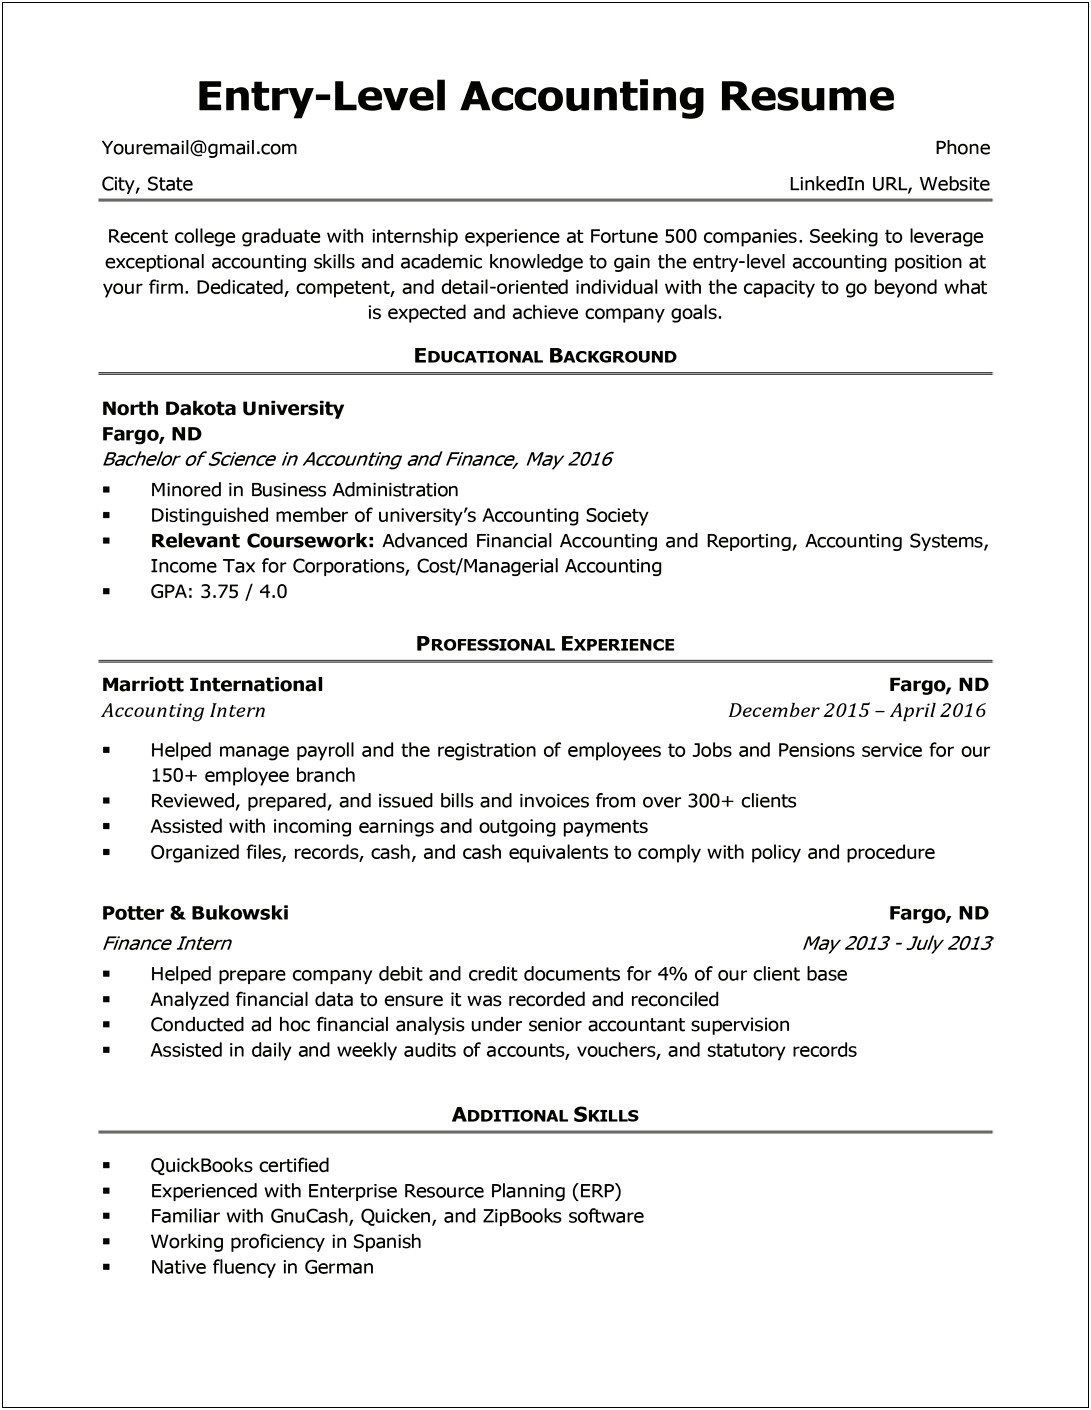 Preparing A Resume With No Experience